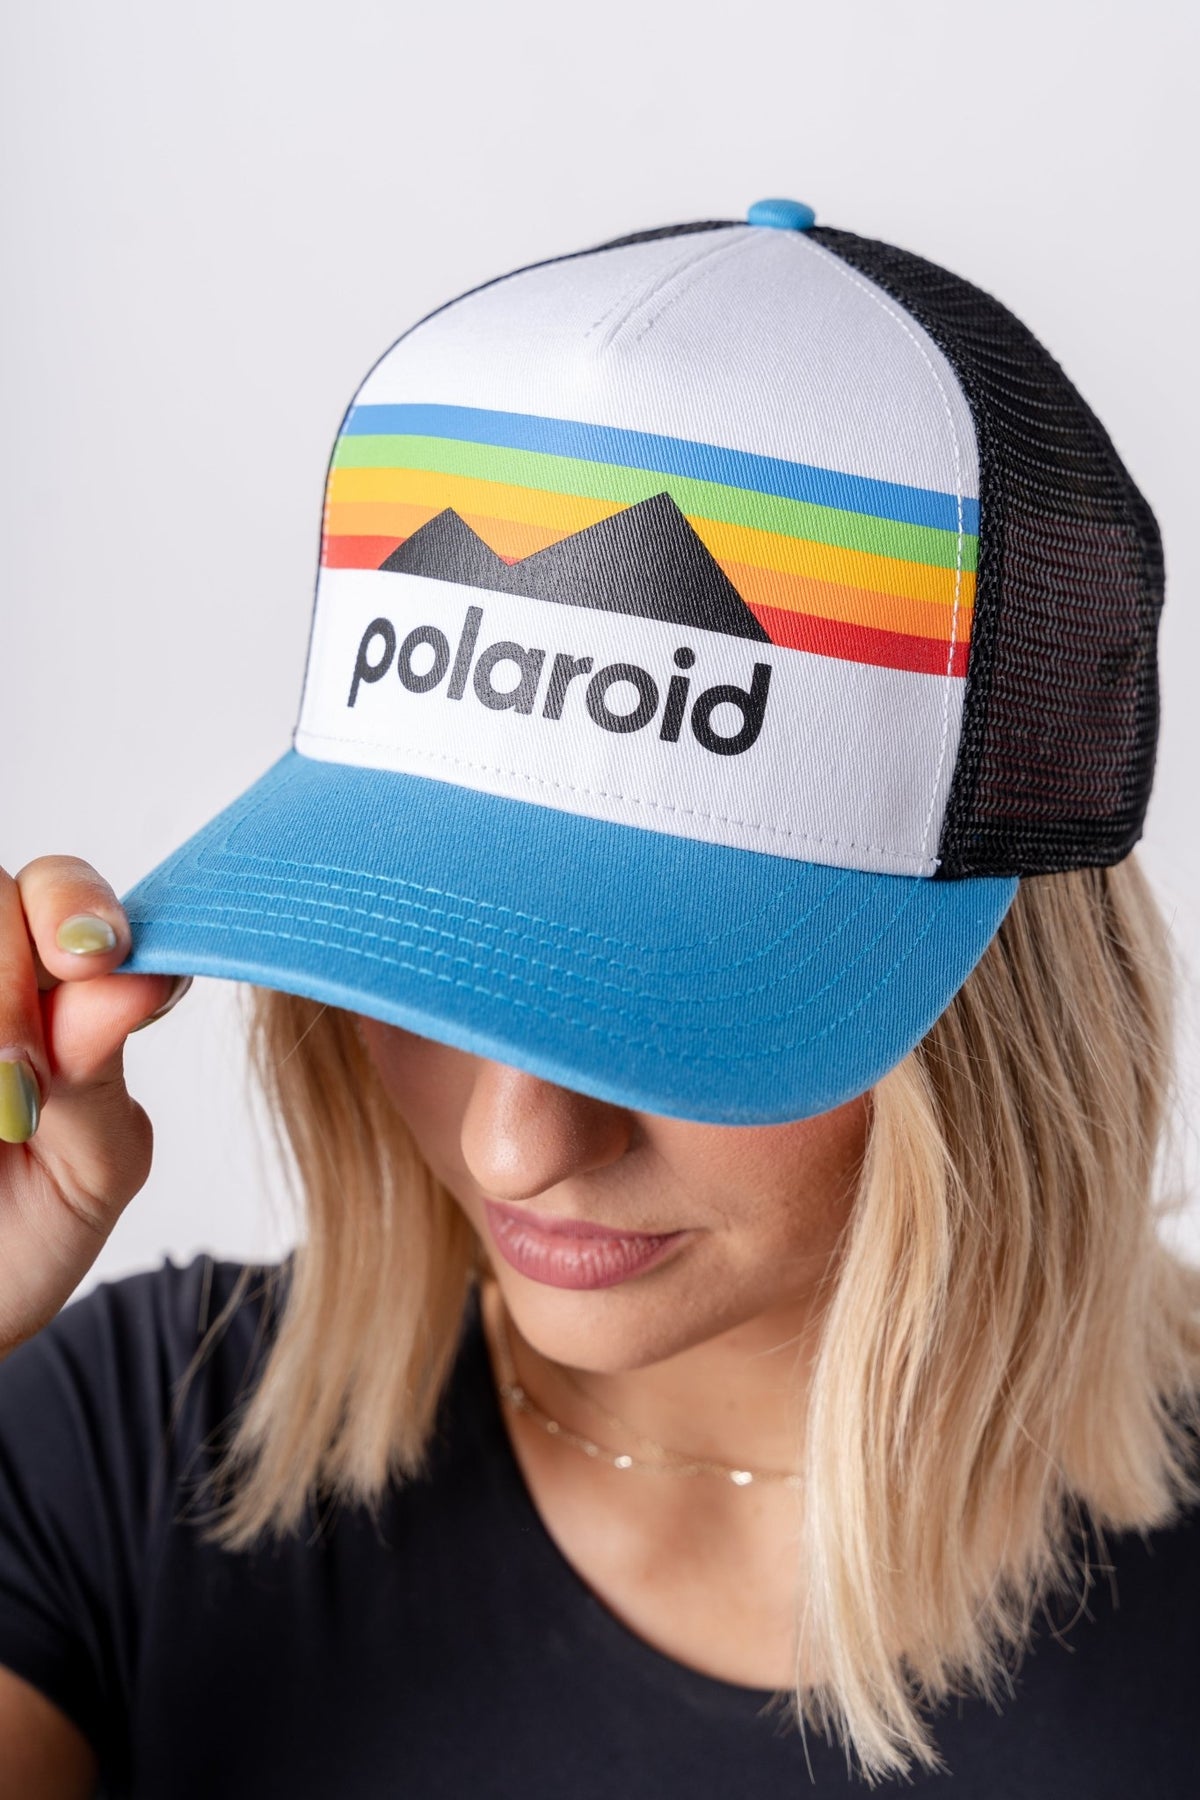 Polaroid sinclair trucker hat white/black - Trendy Gifts at Lush Fashion Lounge Boutique in Oklahoma City